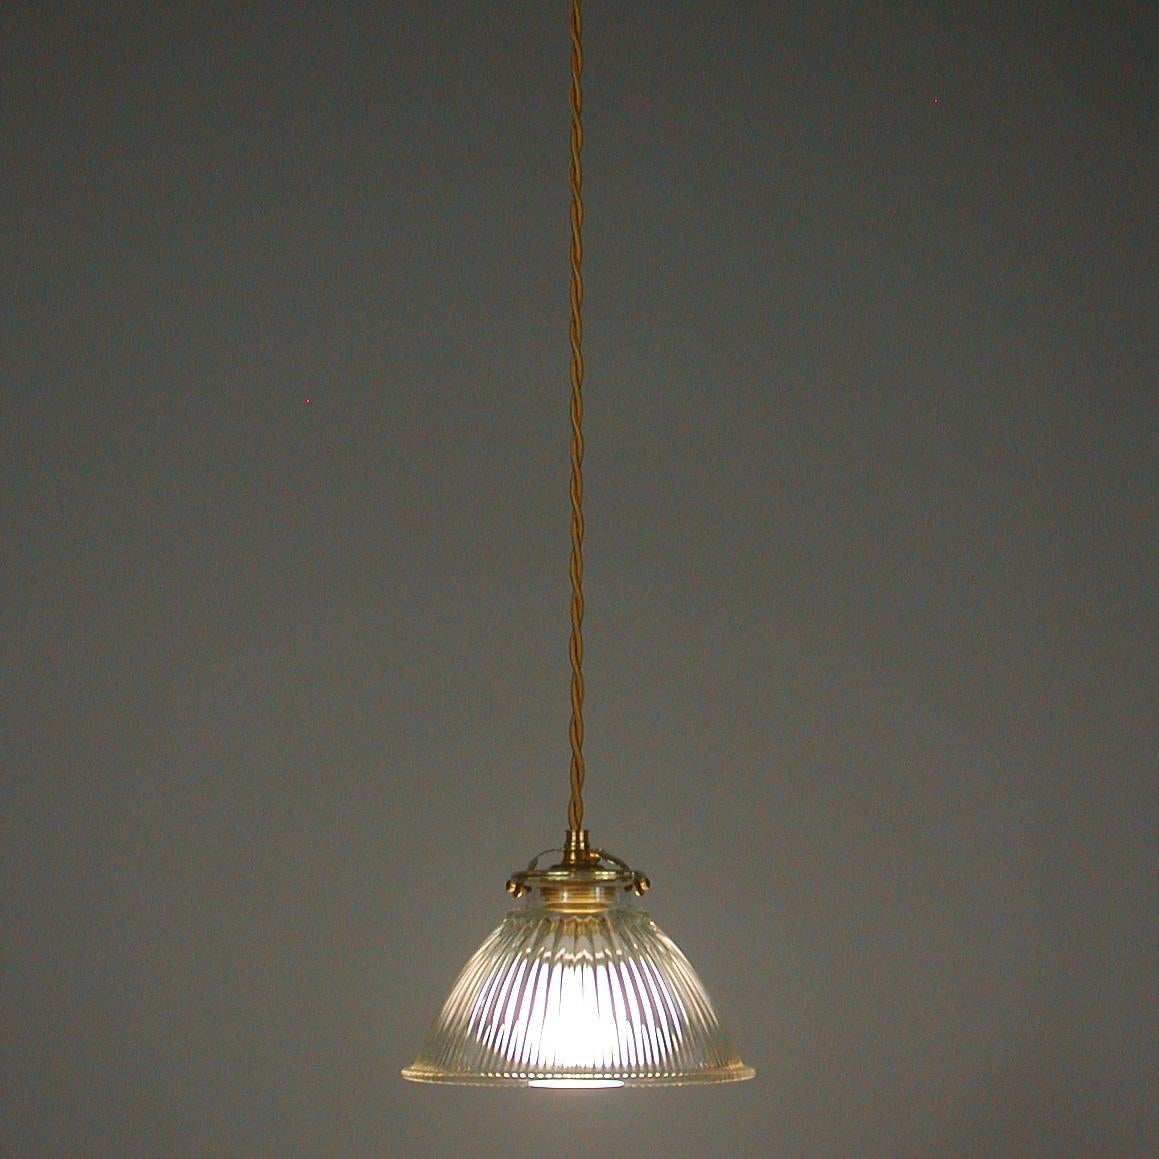 Fabric French Late Art Deco Holophane Industrial Glass Pendant Light, 1930s to 1940s